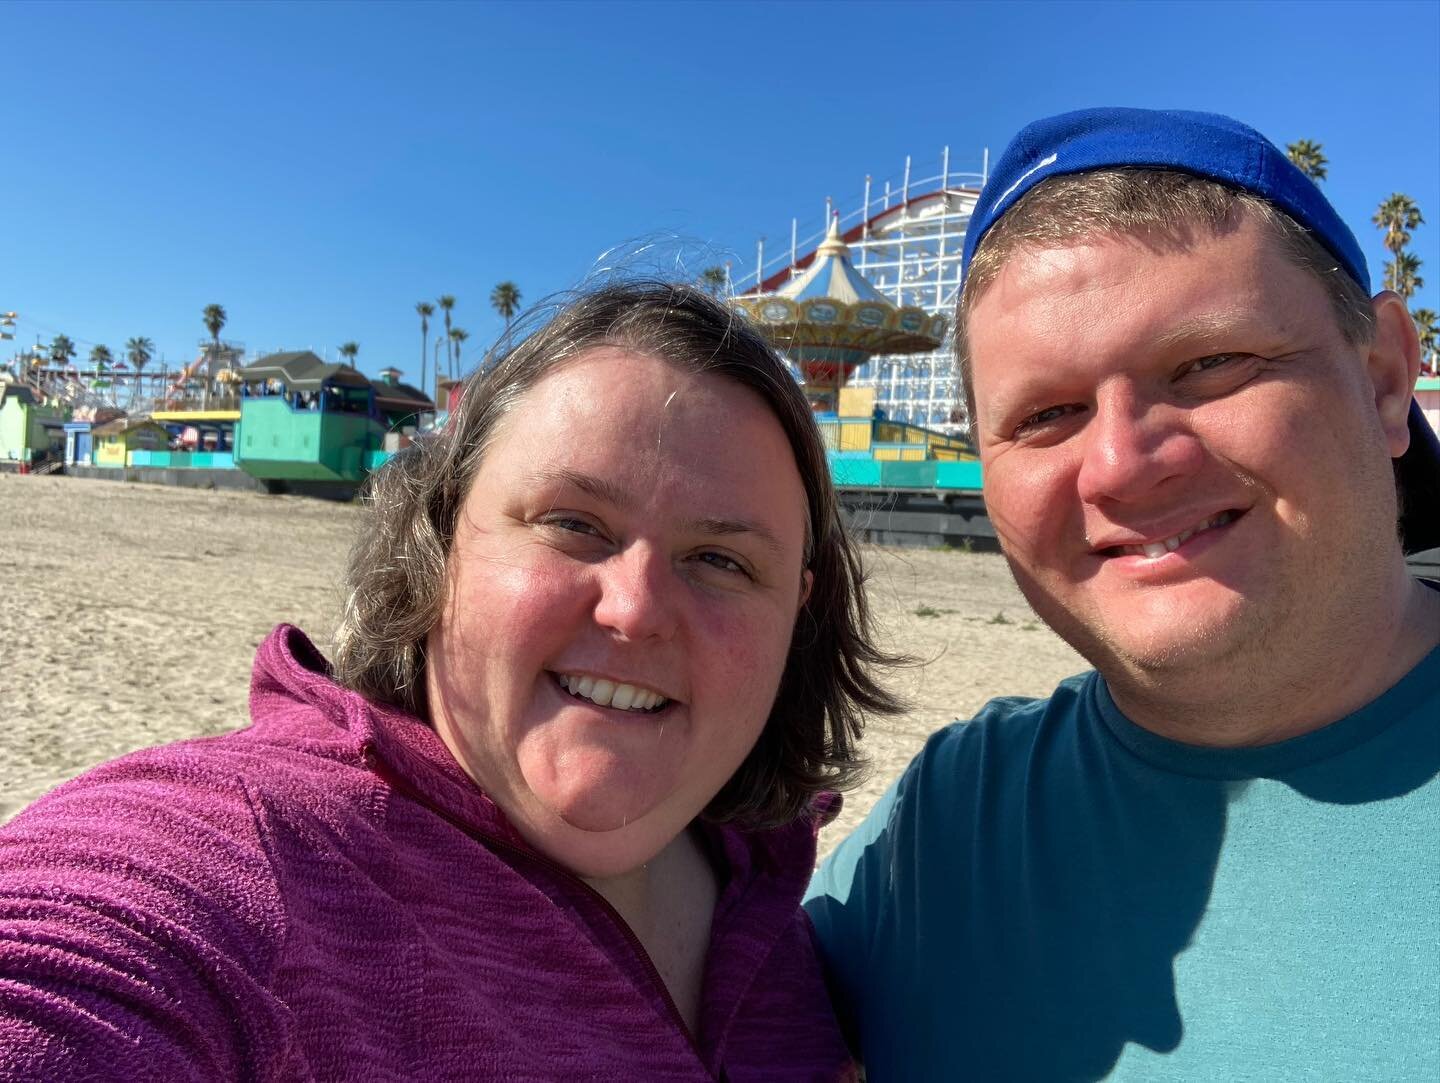 I&rsquo;m so thankful for the gift of a day in Santa Cruz. We walked almost 8 miles soaking in the sun, making memories and enjoying the beautiful views.